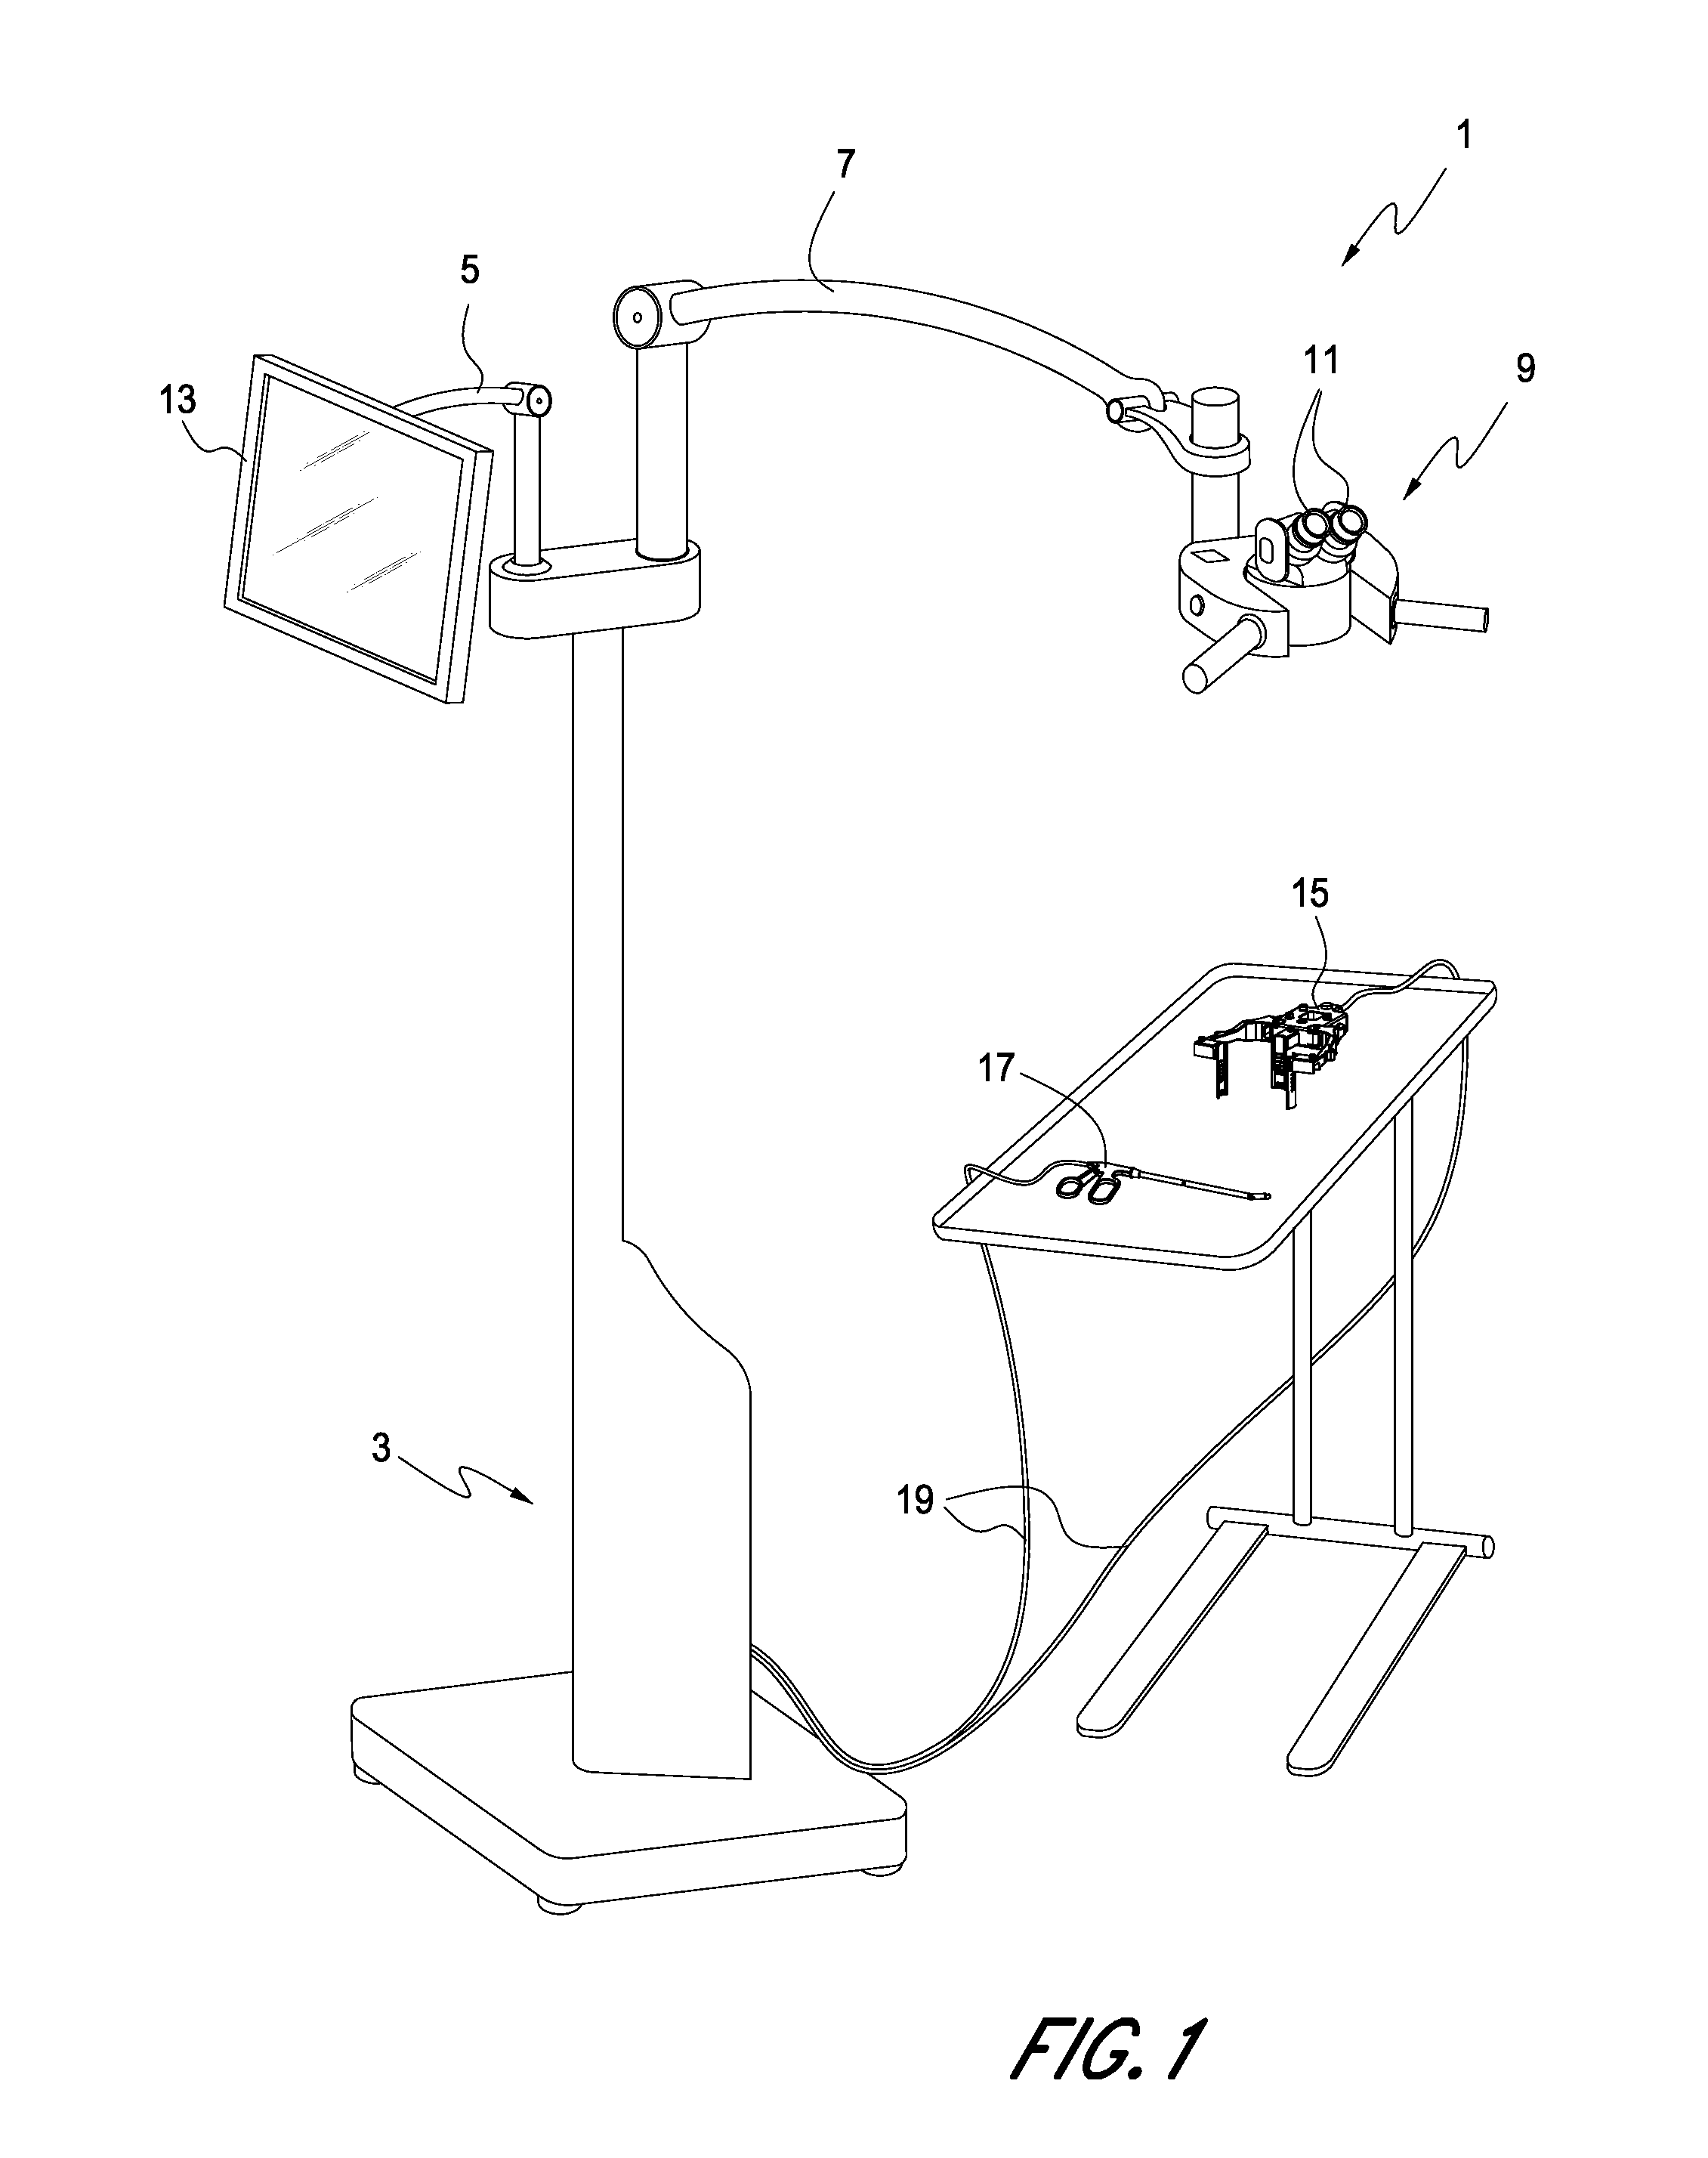 Surgical visualization system